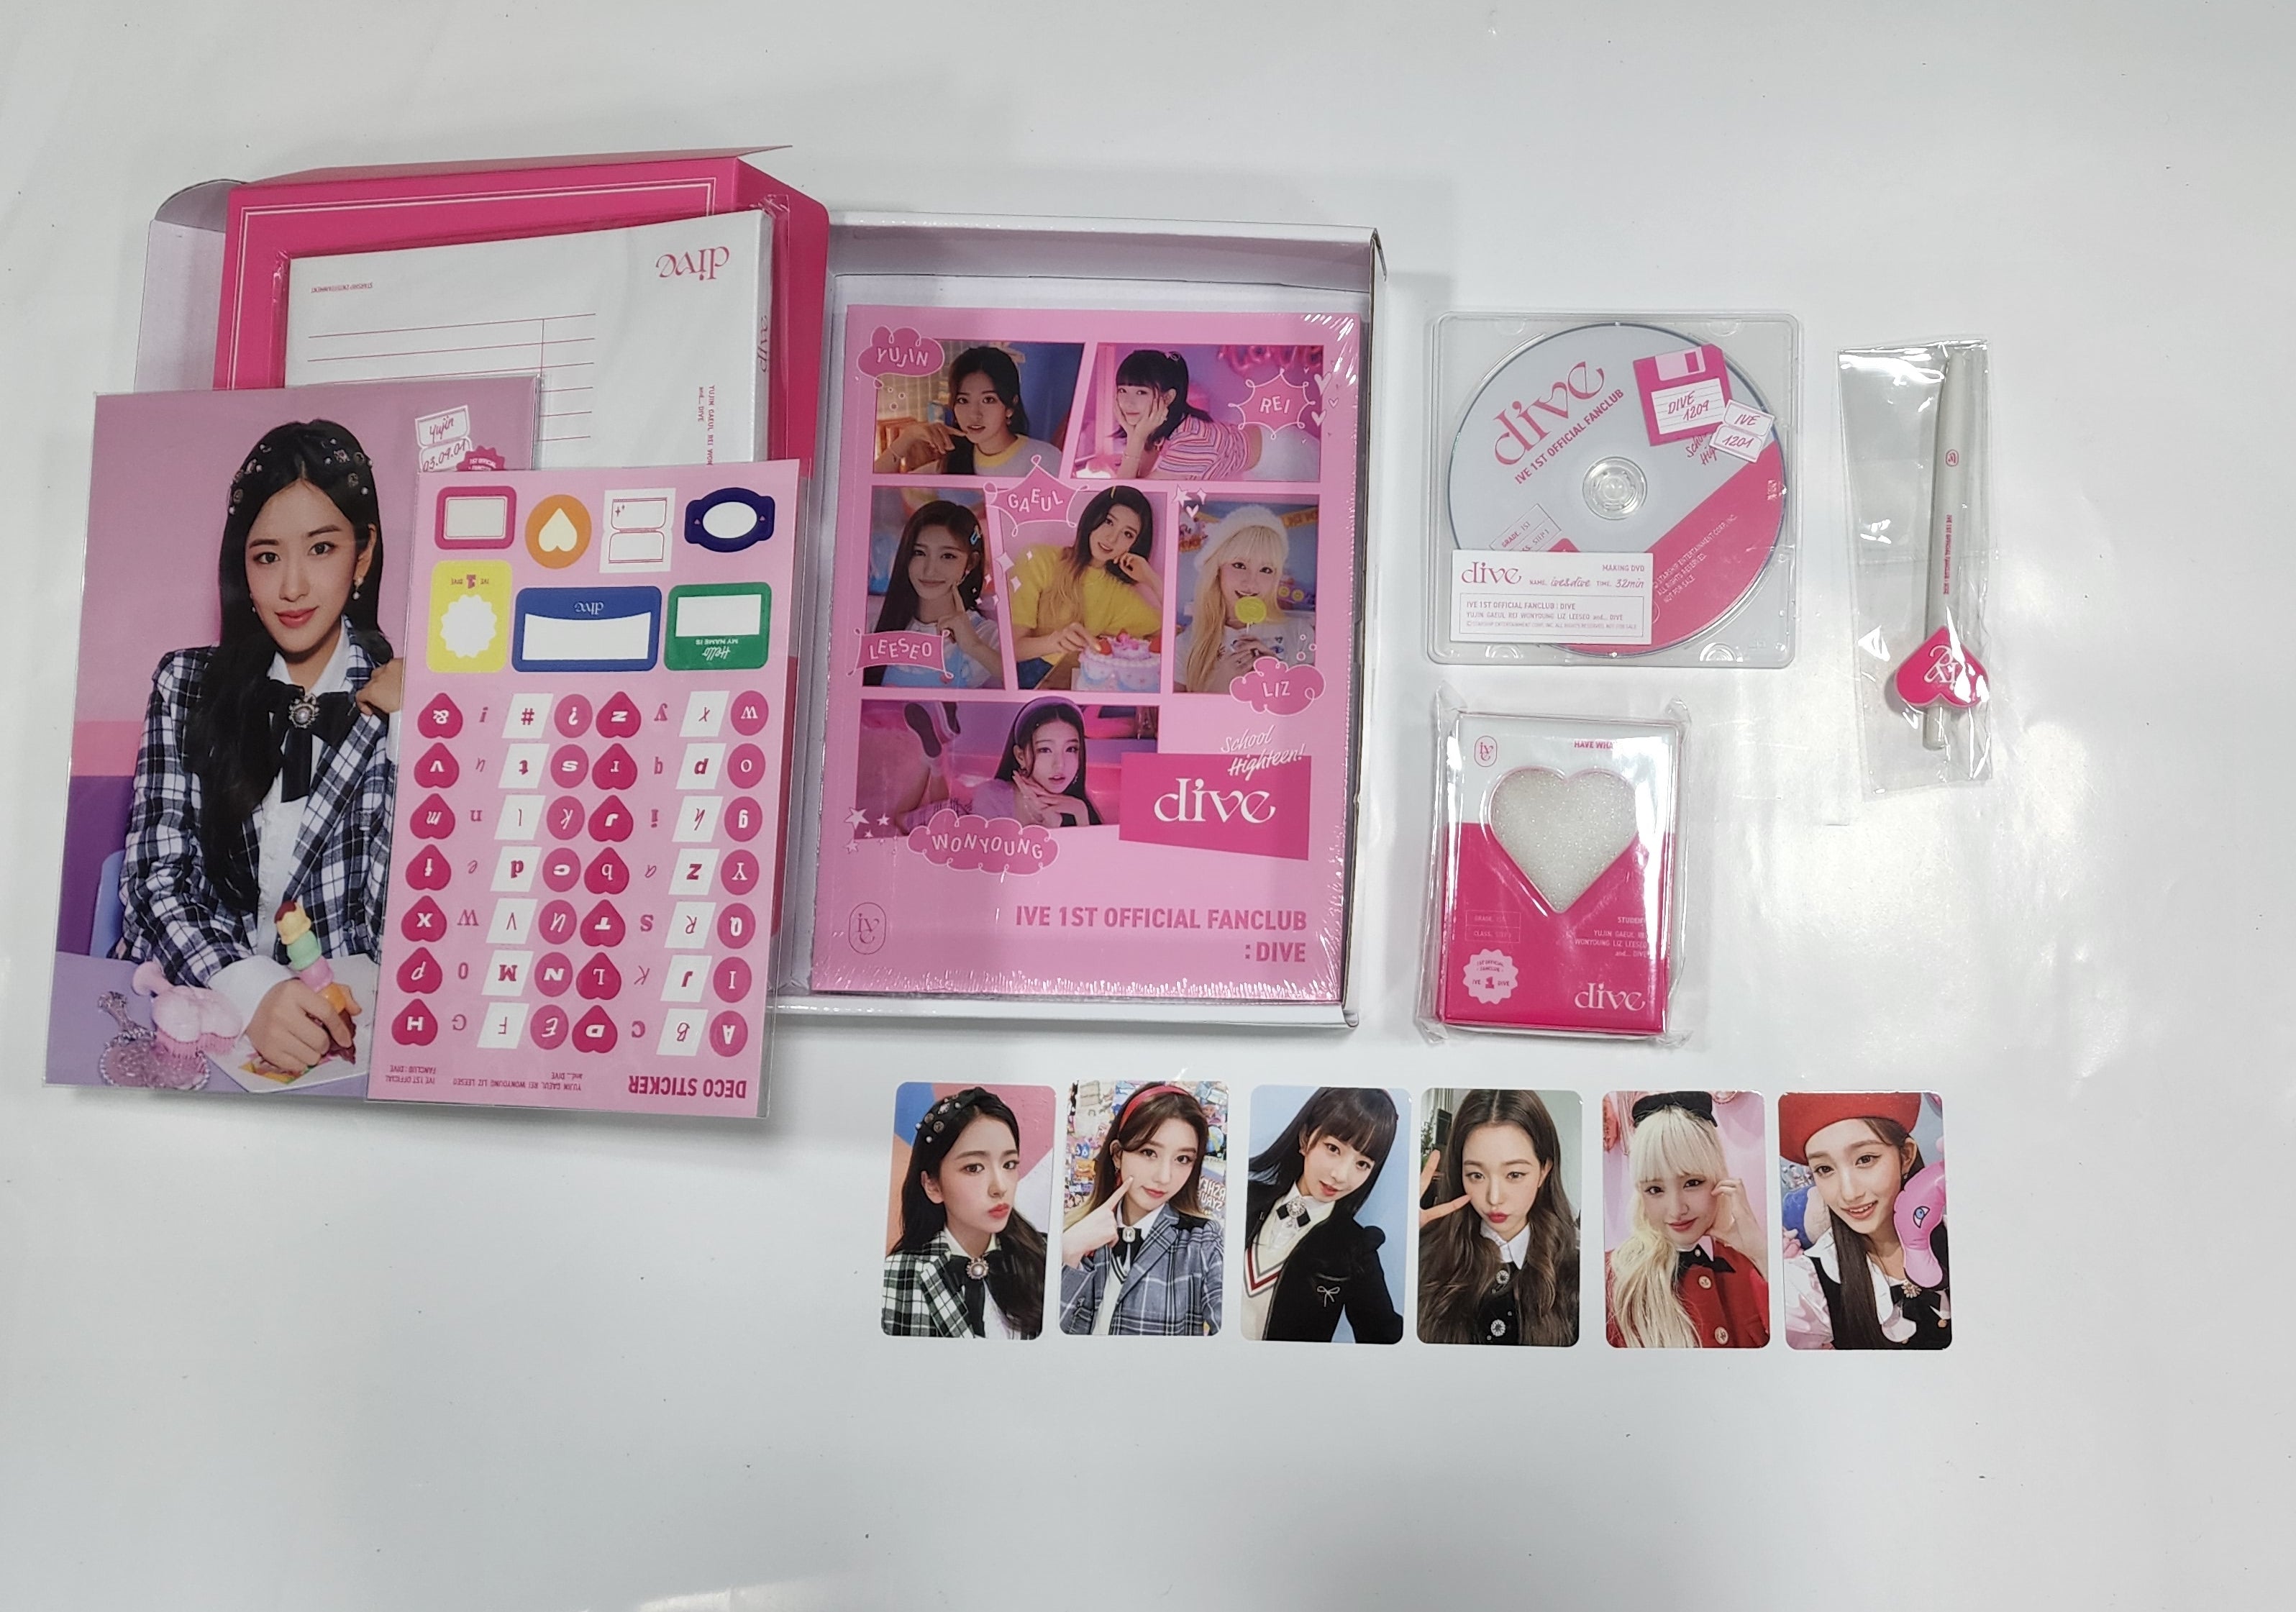 IVE - 1st Official Fanclub DIVE Membership Event Official Kit - Must Read !